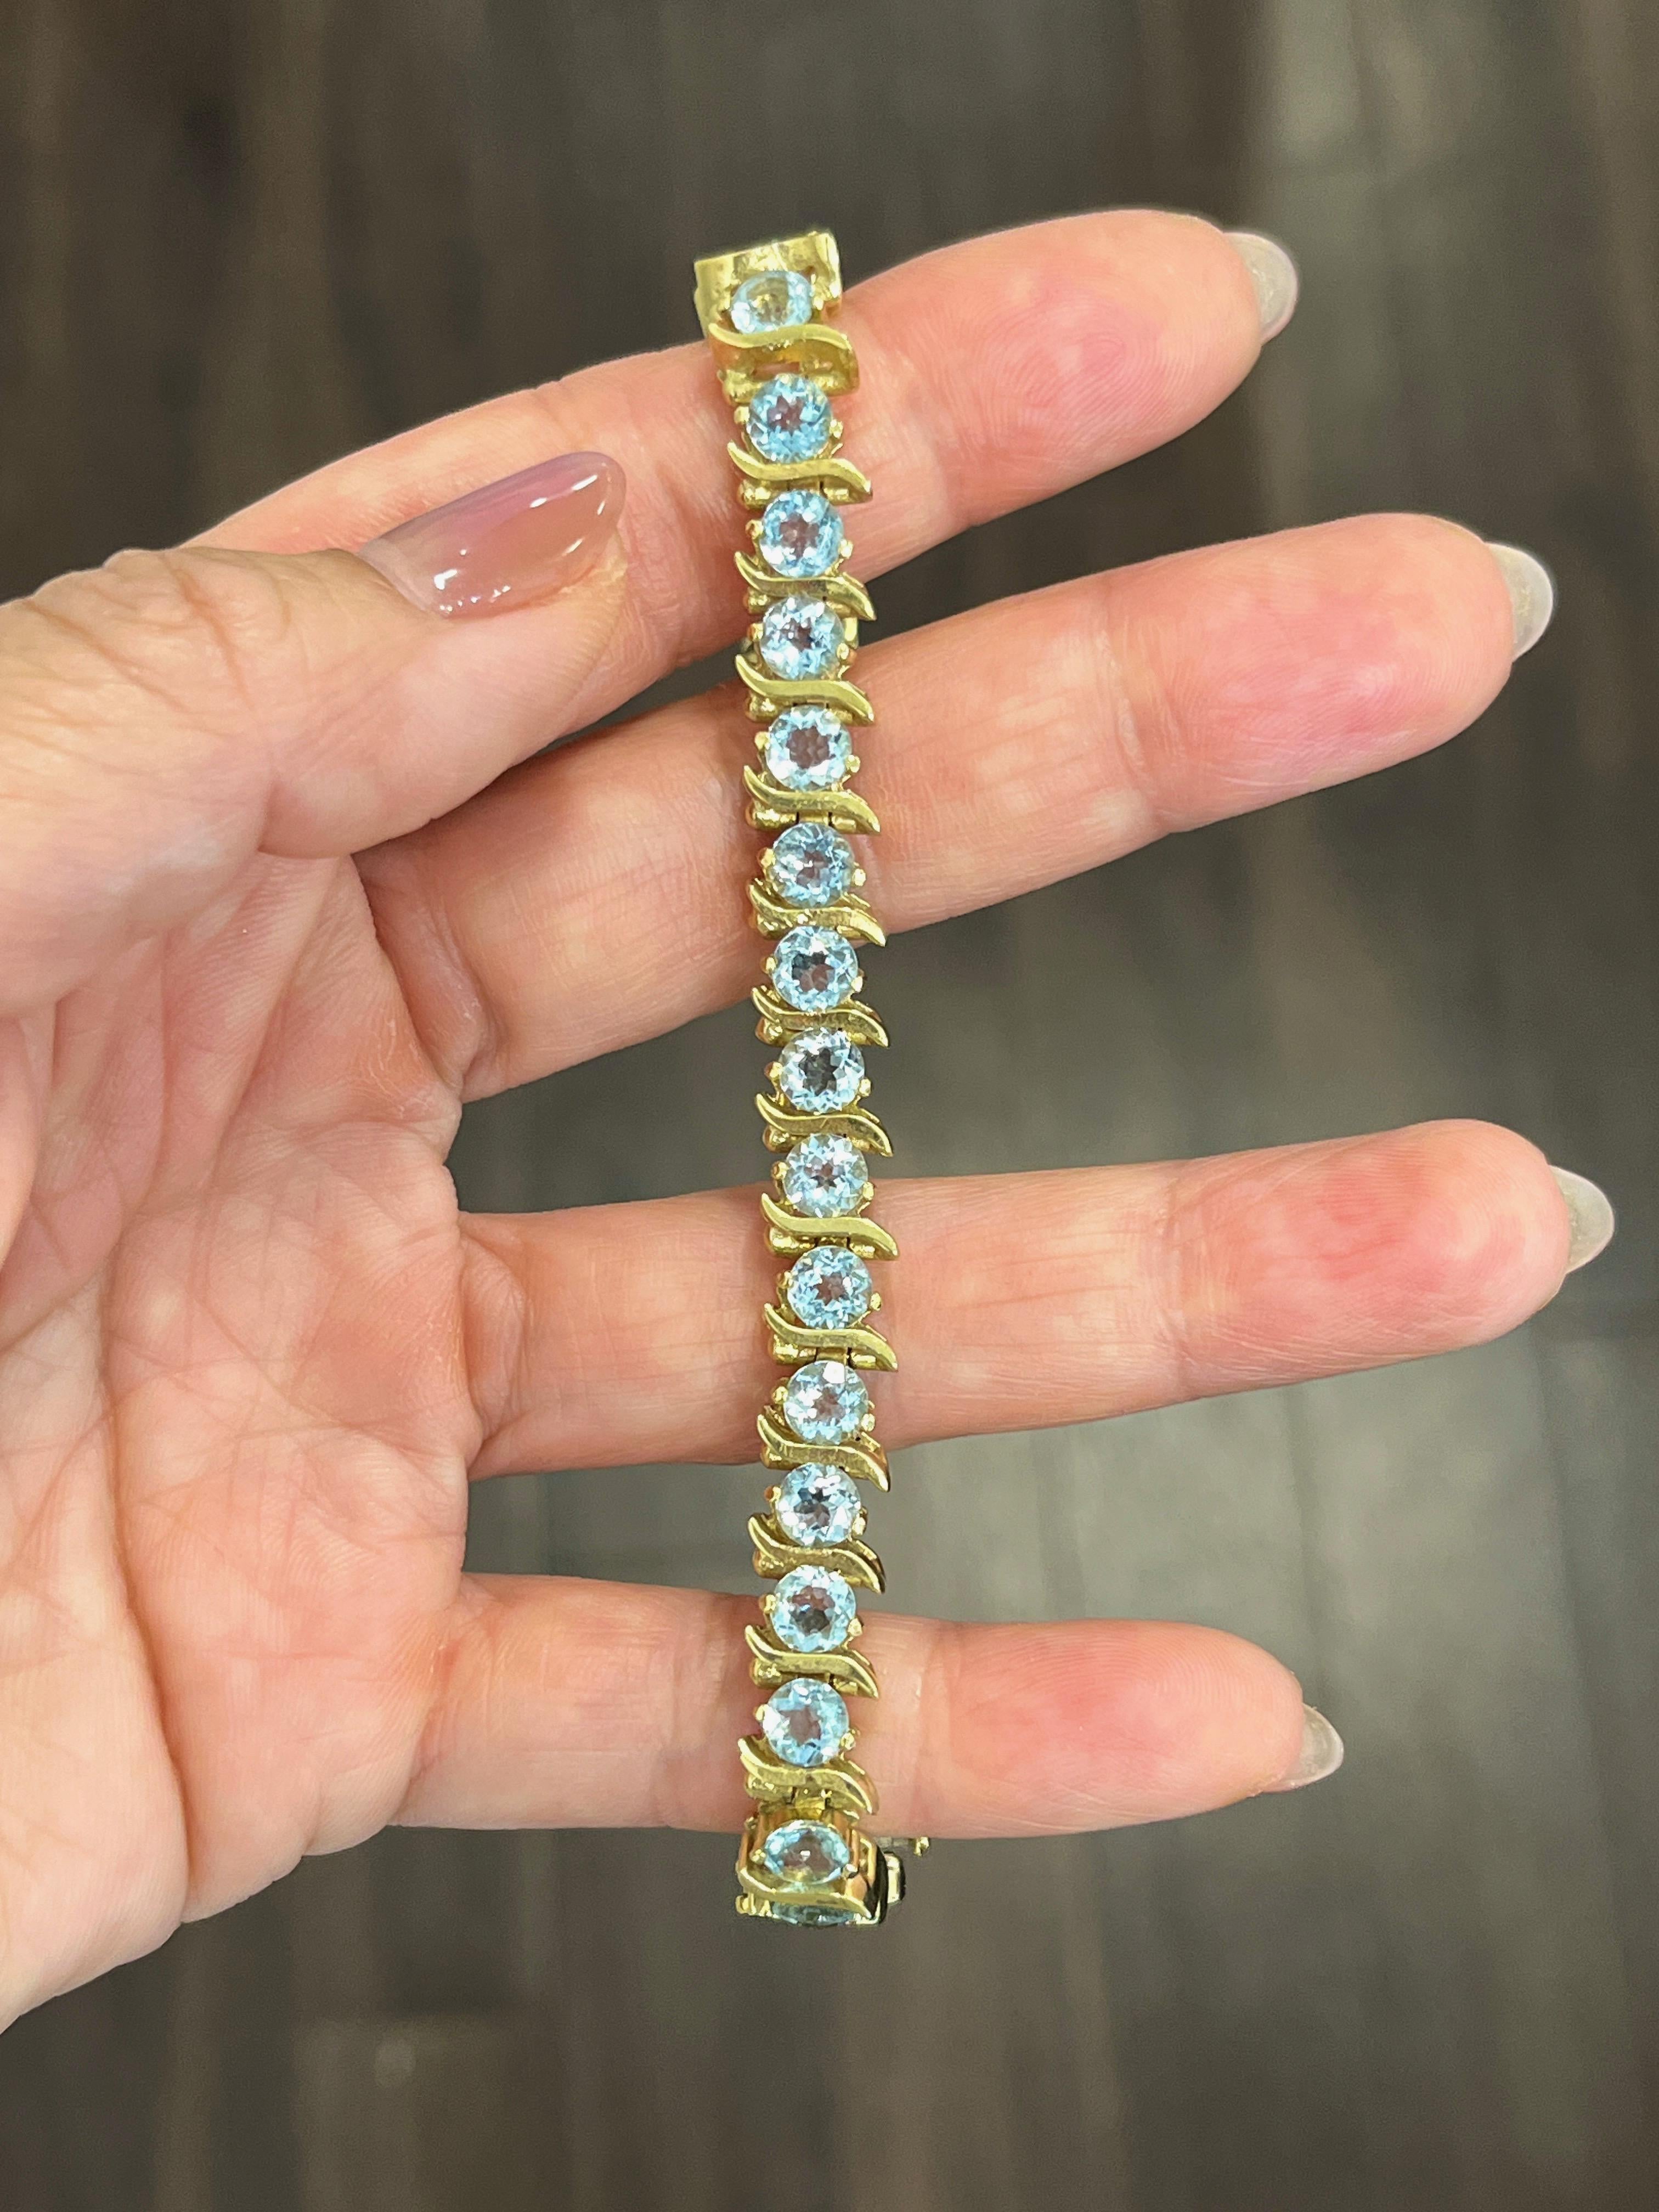 This gorgeous 12.08 ct natural aquamarine bracelet set in 14k yellow gold boasts 28 aquamarine stones. This is a beautiful piece to dress up any wardrobe, or with any everyday outfit.  